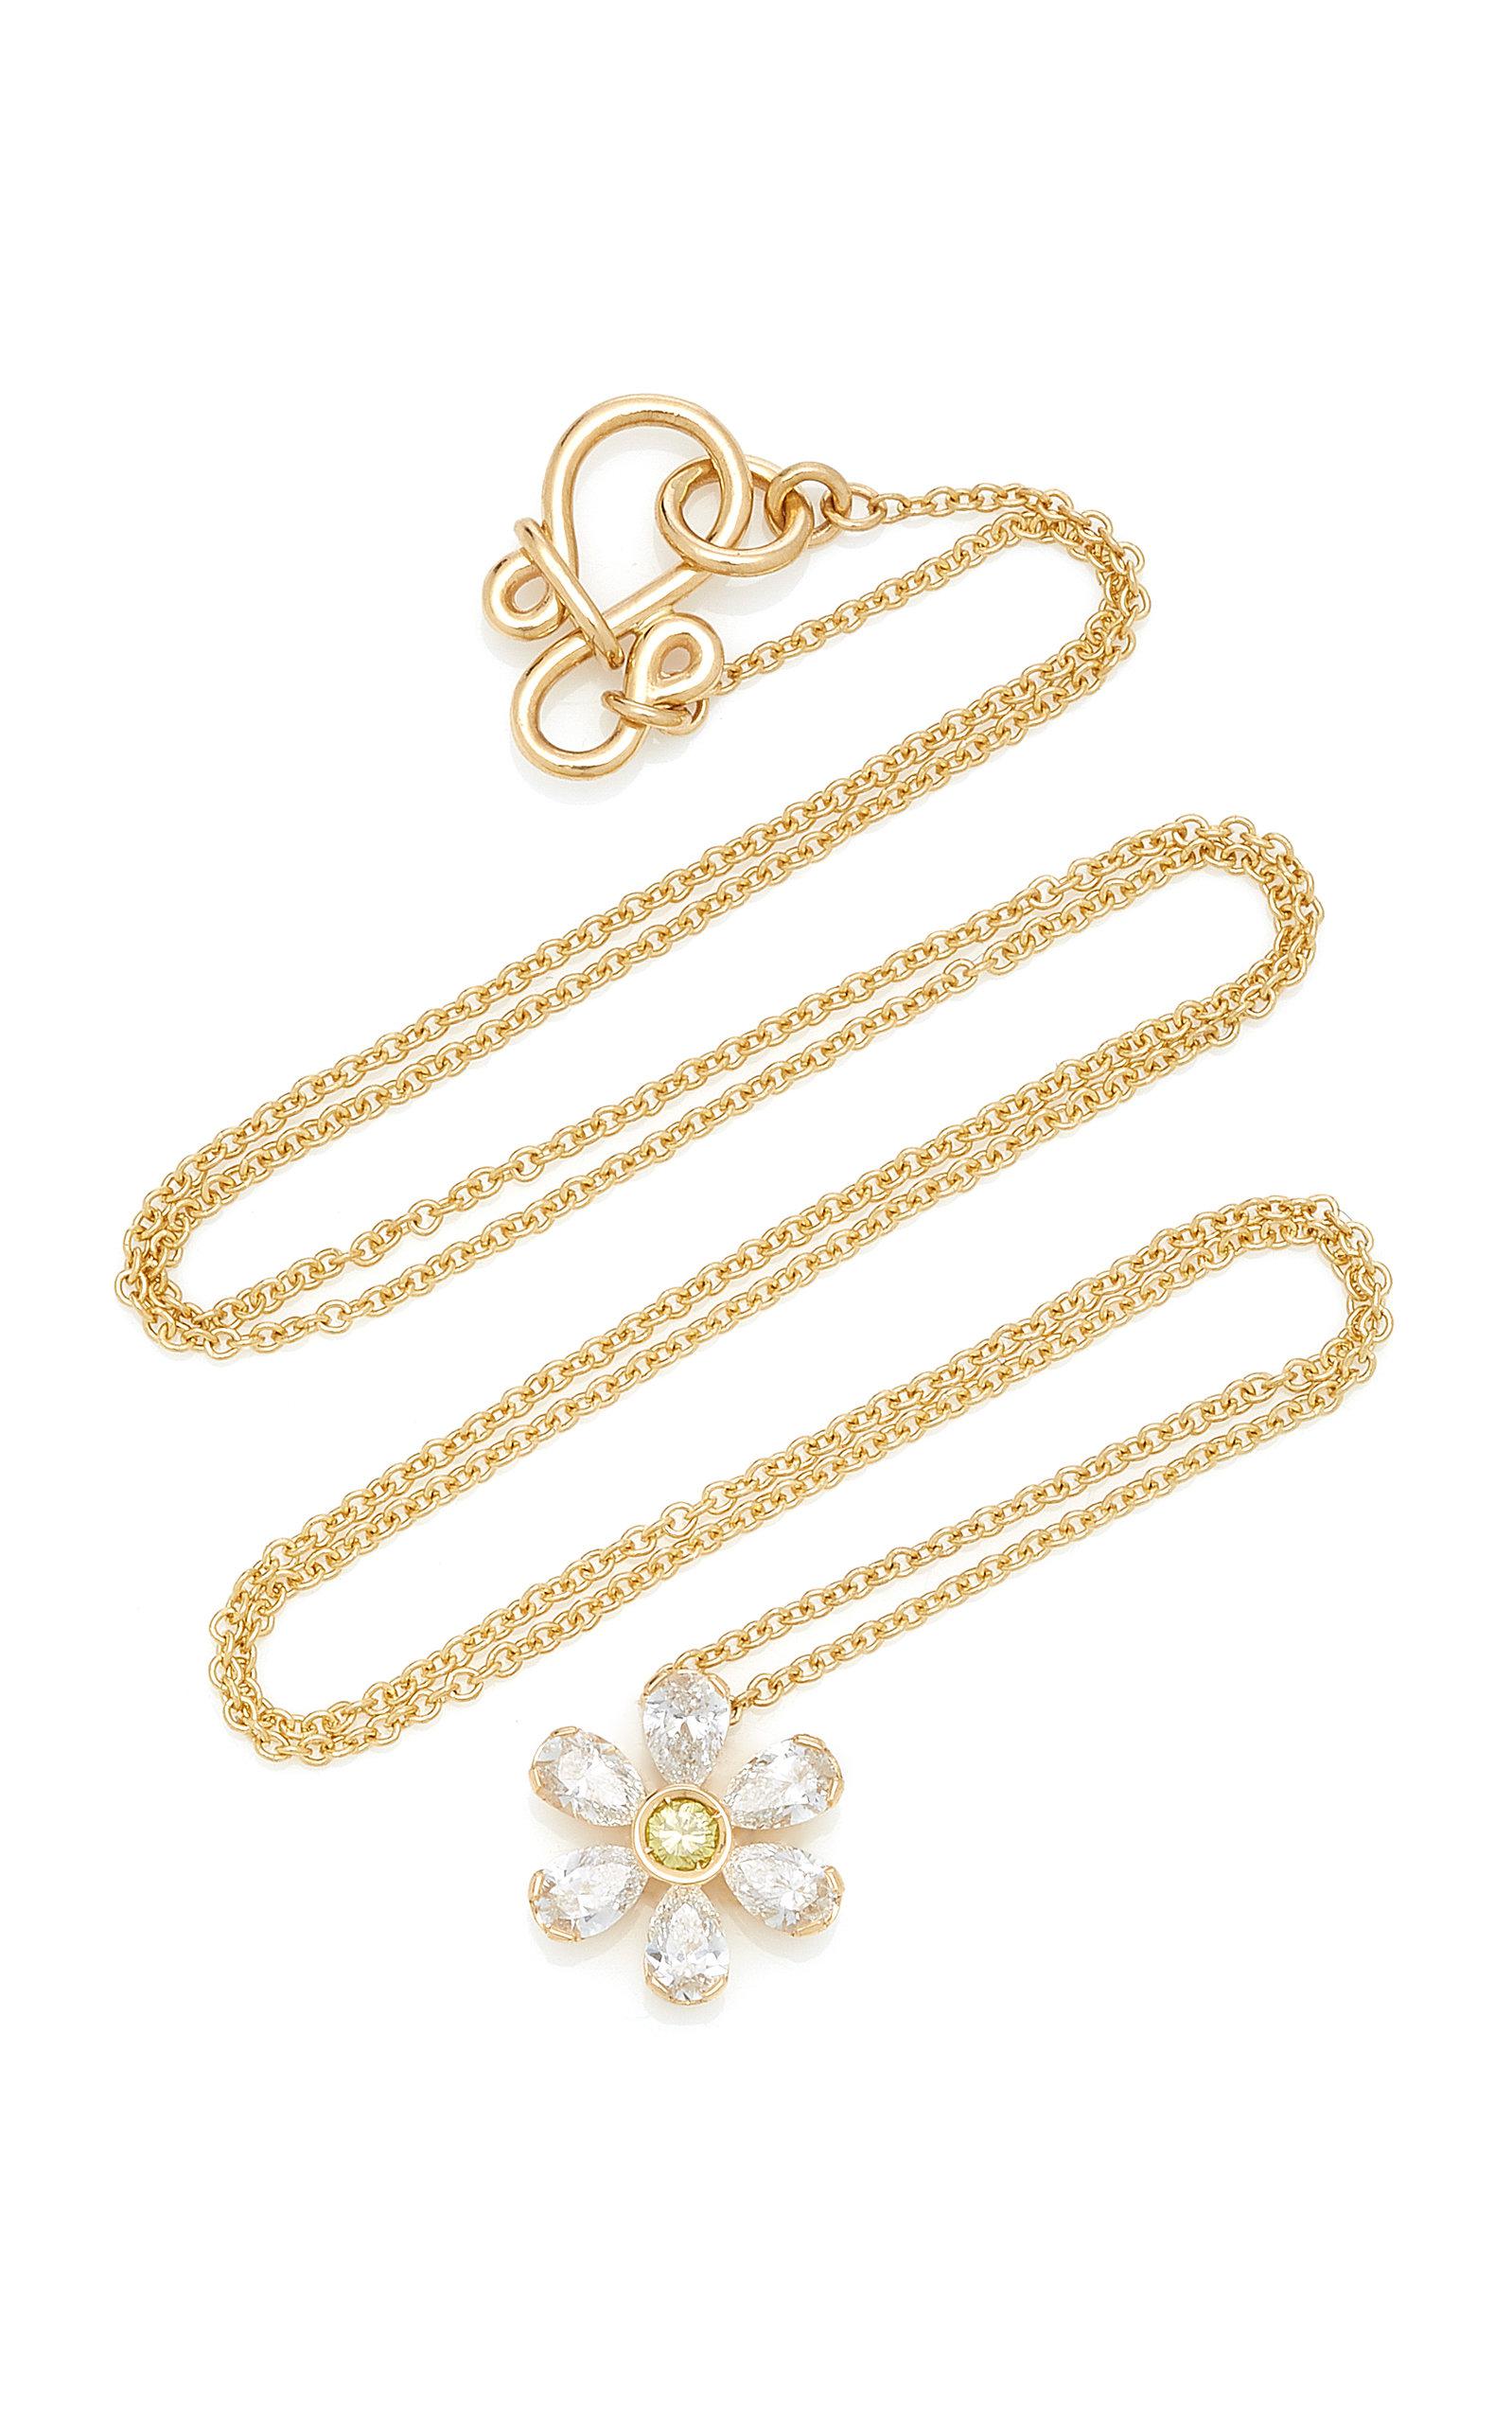 Sophie Bille Brahe Canary Marguerite 18k Gold Diamond Necklace in ...